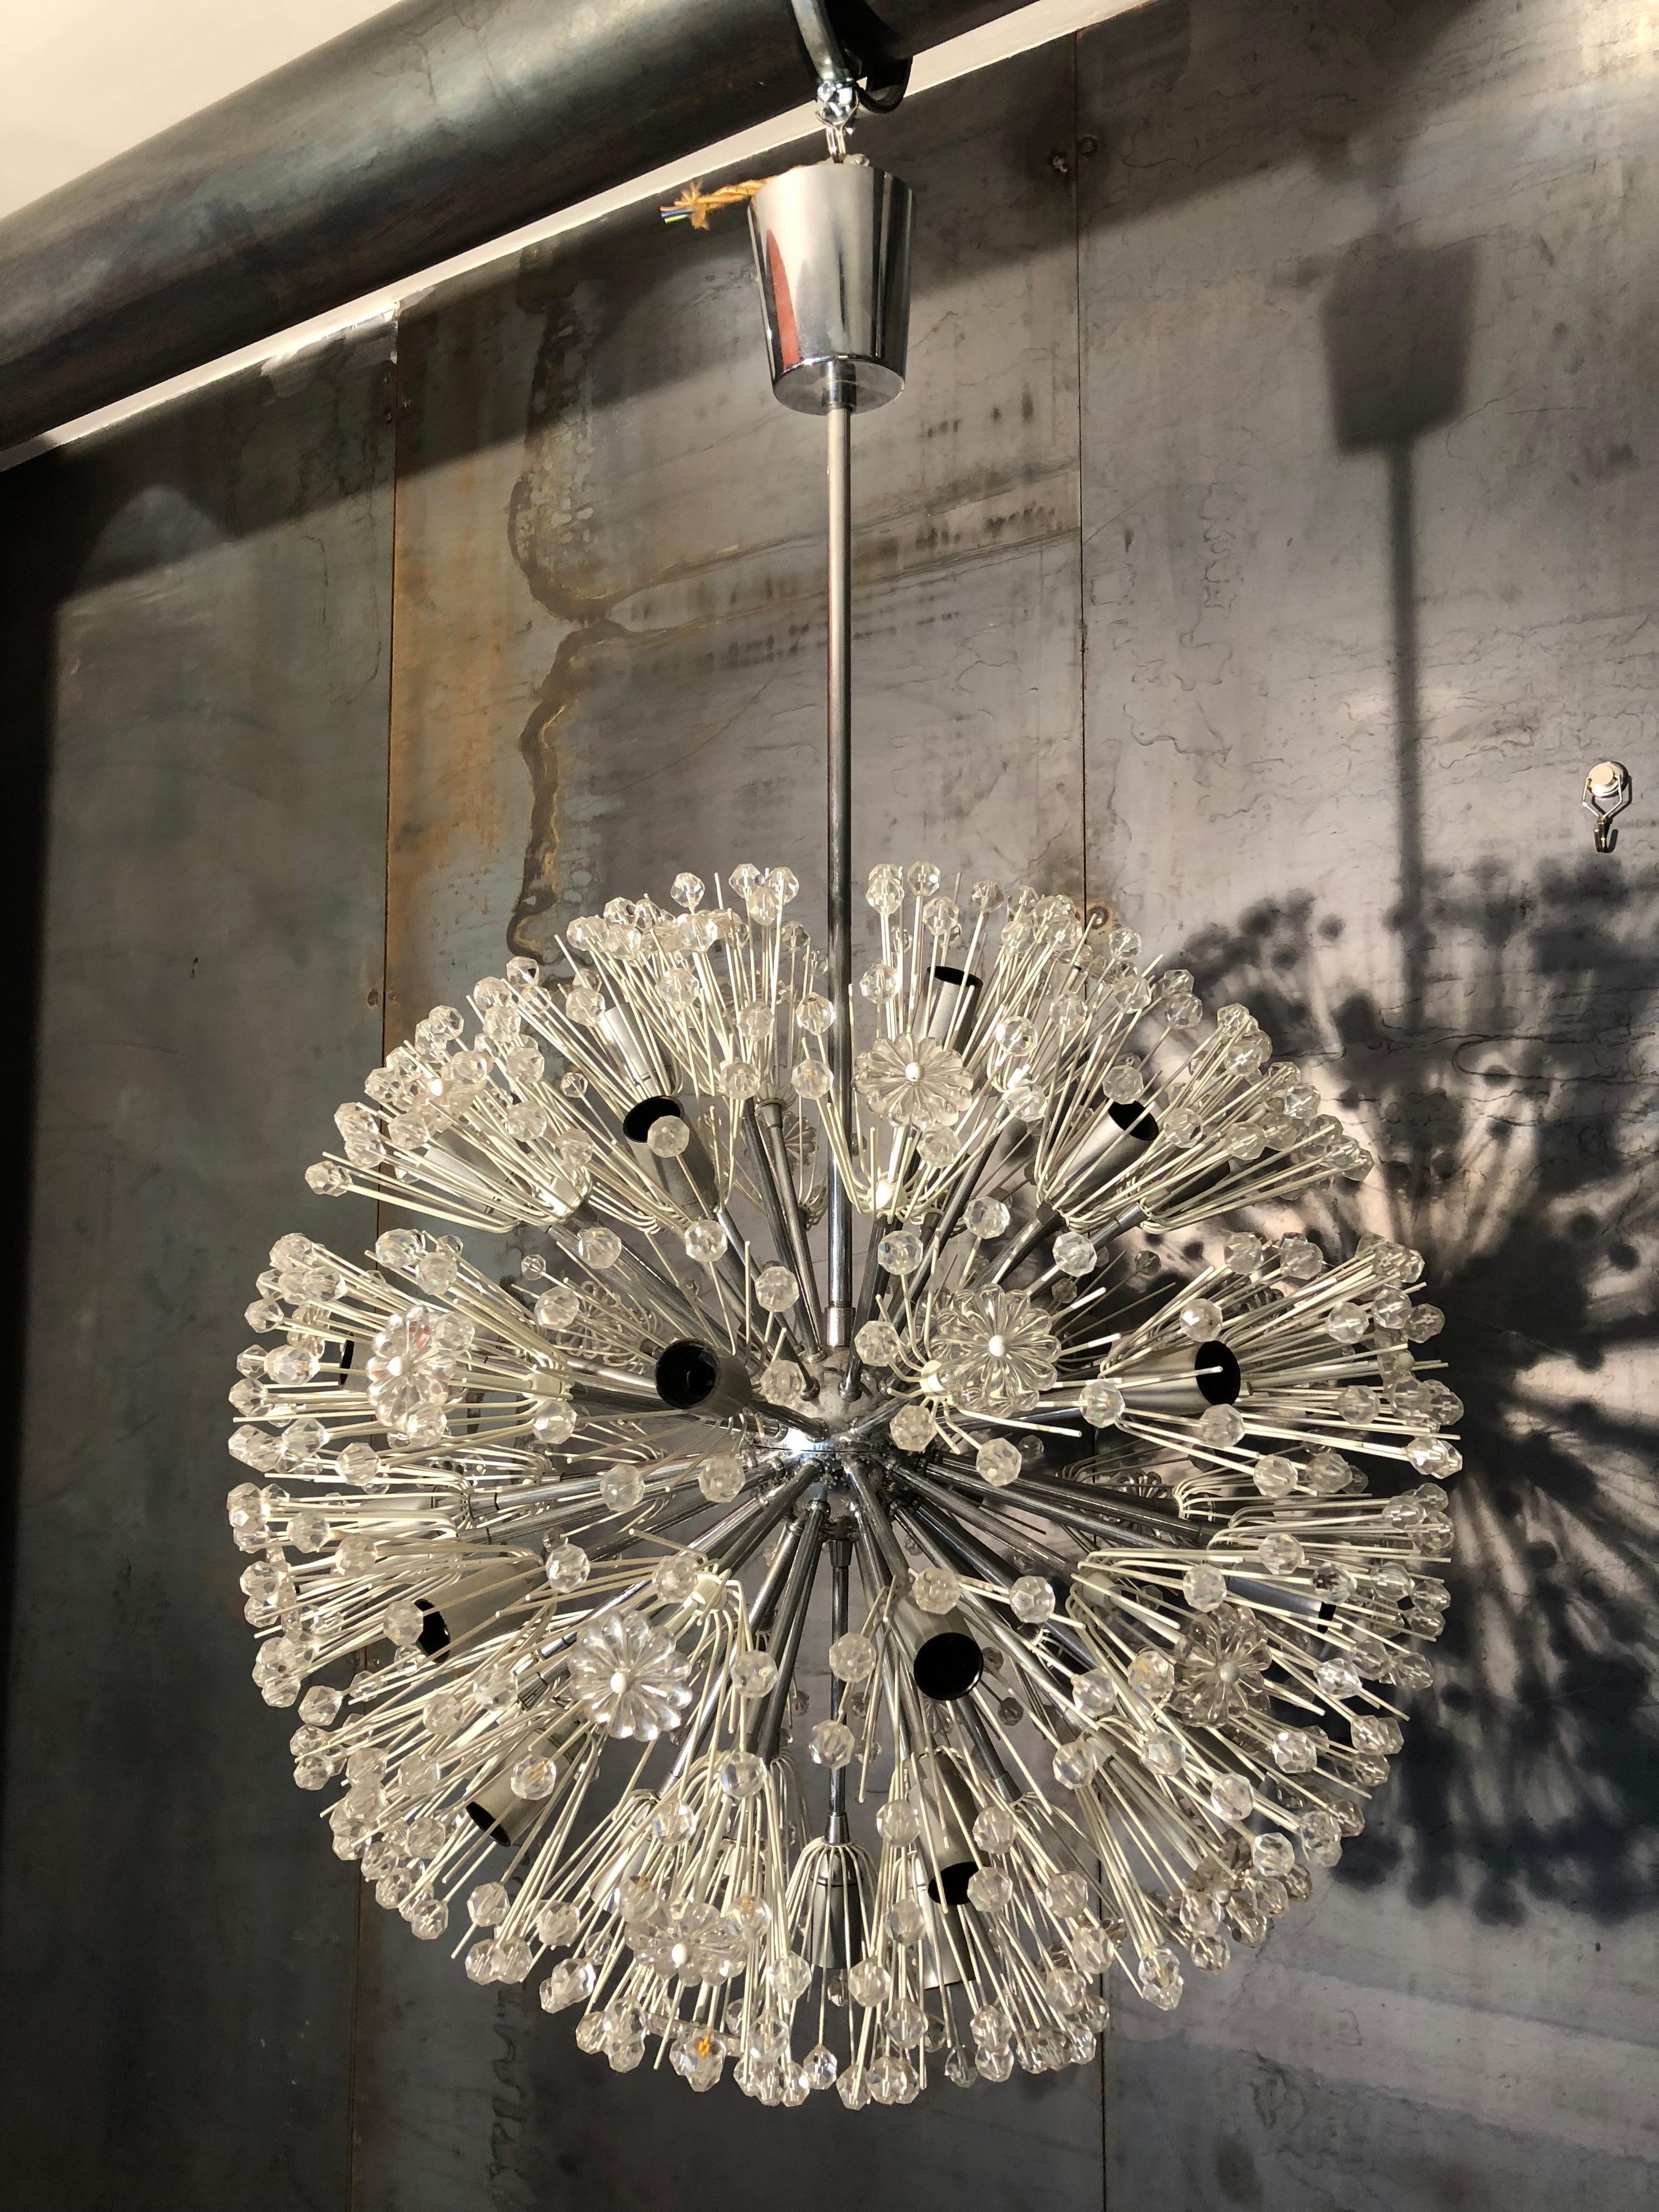 Extra large size for this midcentury Sputnik chandelier designed by Emil Stejinar. Great conditions with some restorations. The white parts have been repainted. The wiring has been partially replaced. Full working with EU standards. Measures: